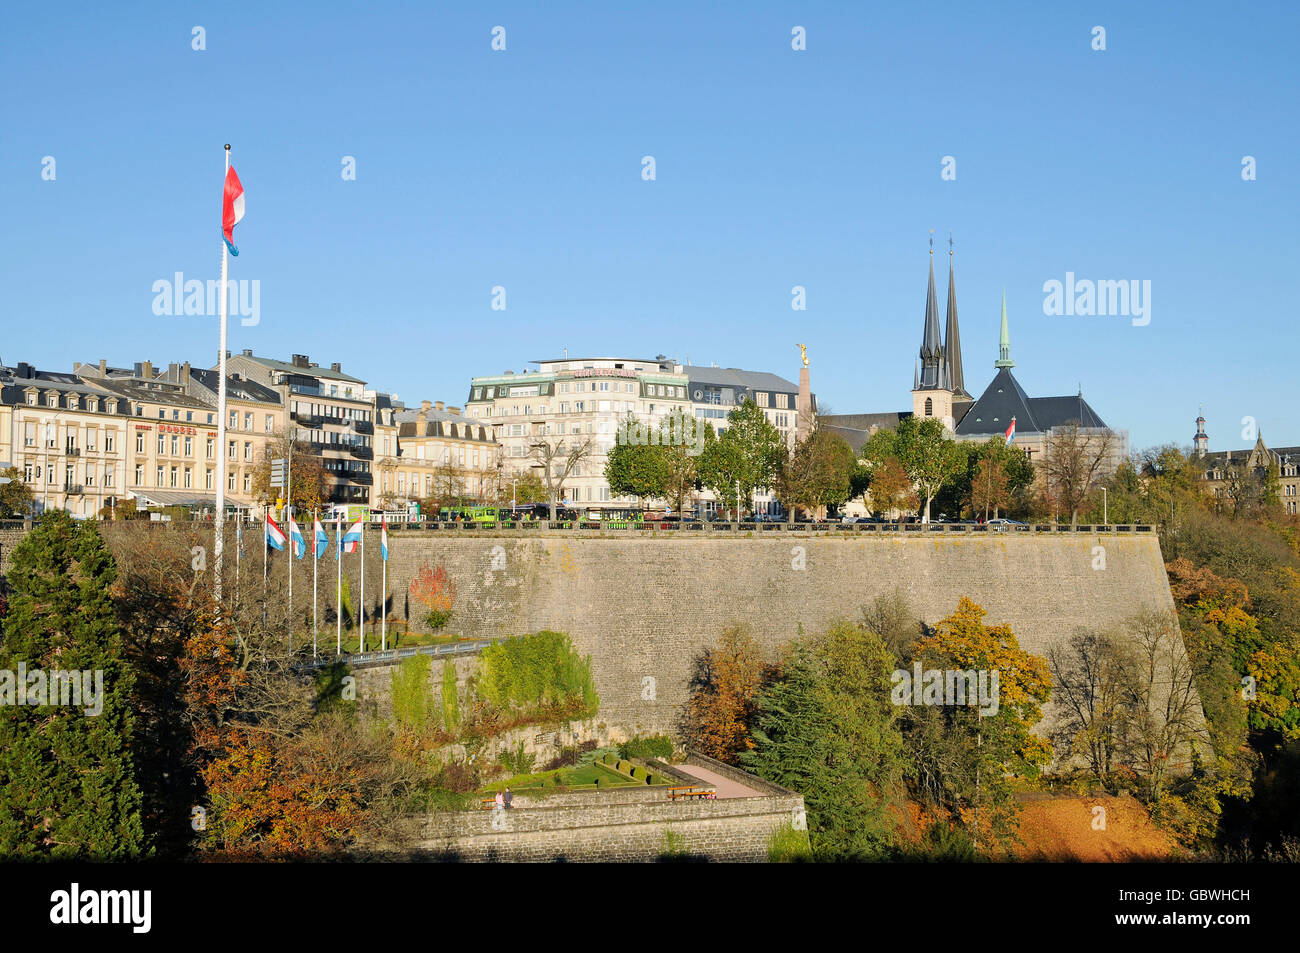 Petrusse Valley, Petruss, Place de Constitution, cathedral Notre Dame, Luxembourg city, Luxembourg Stock Photo